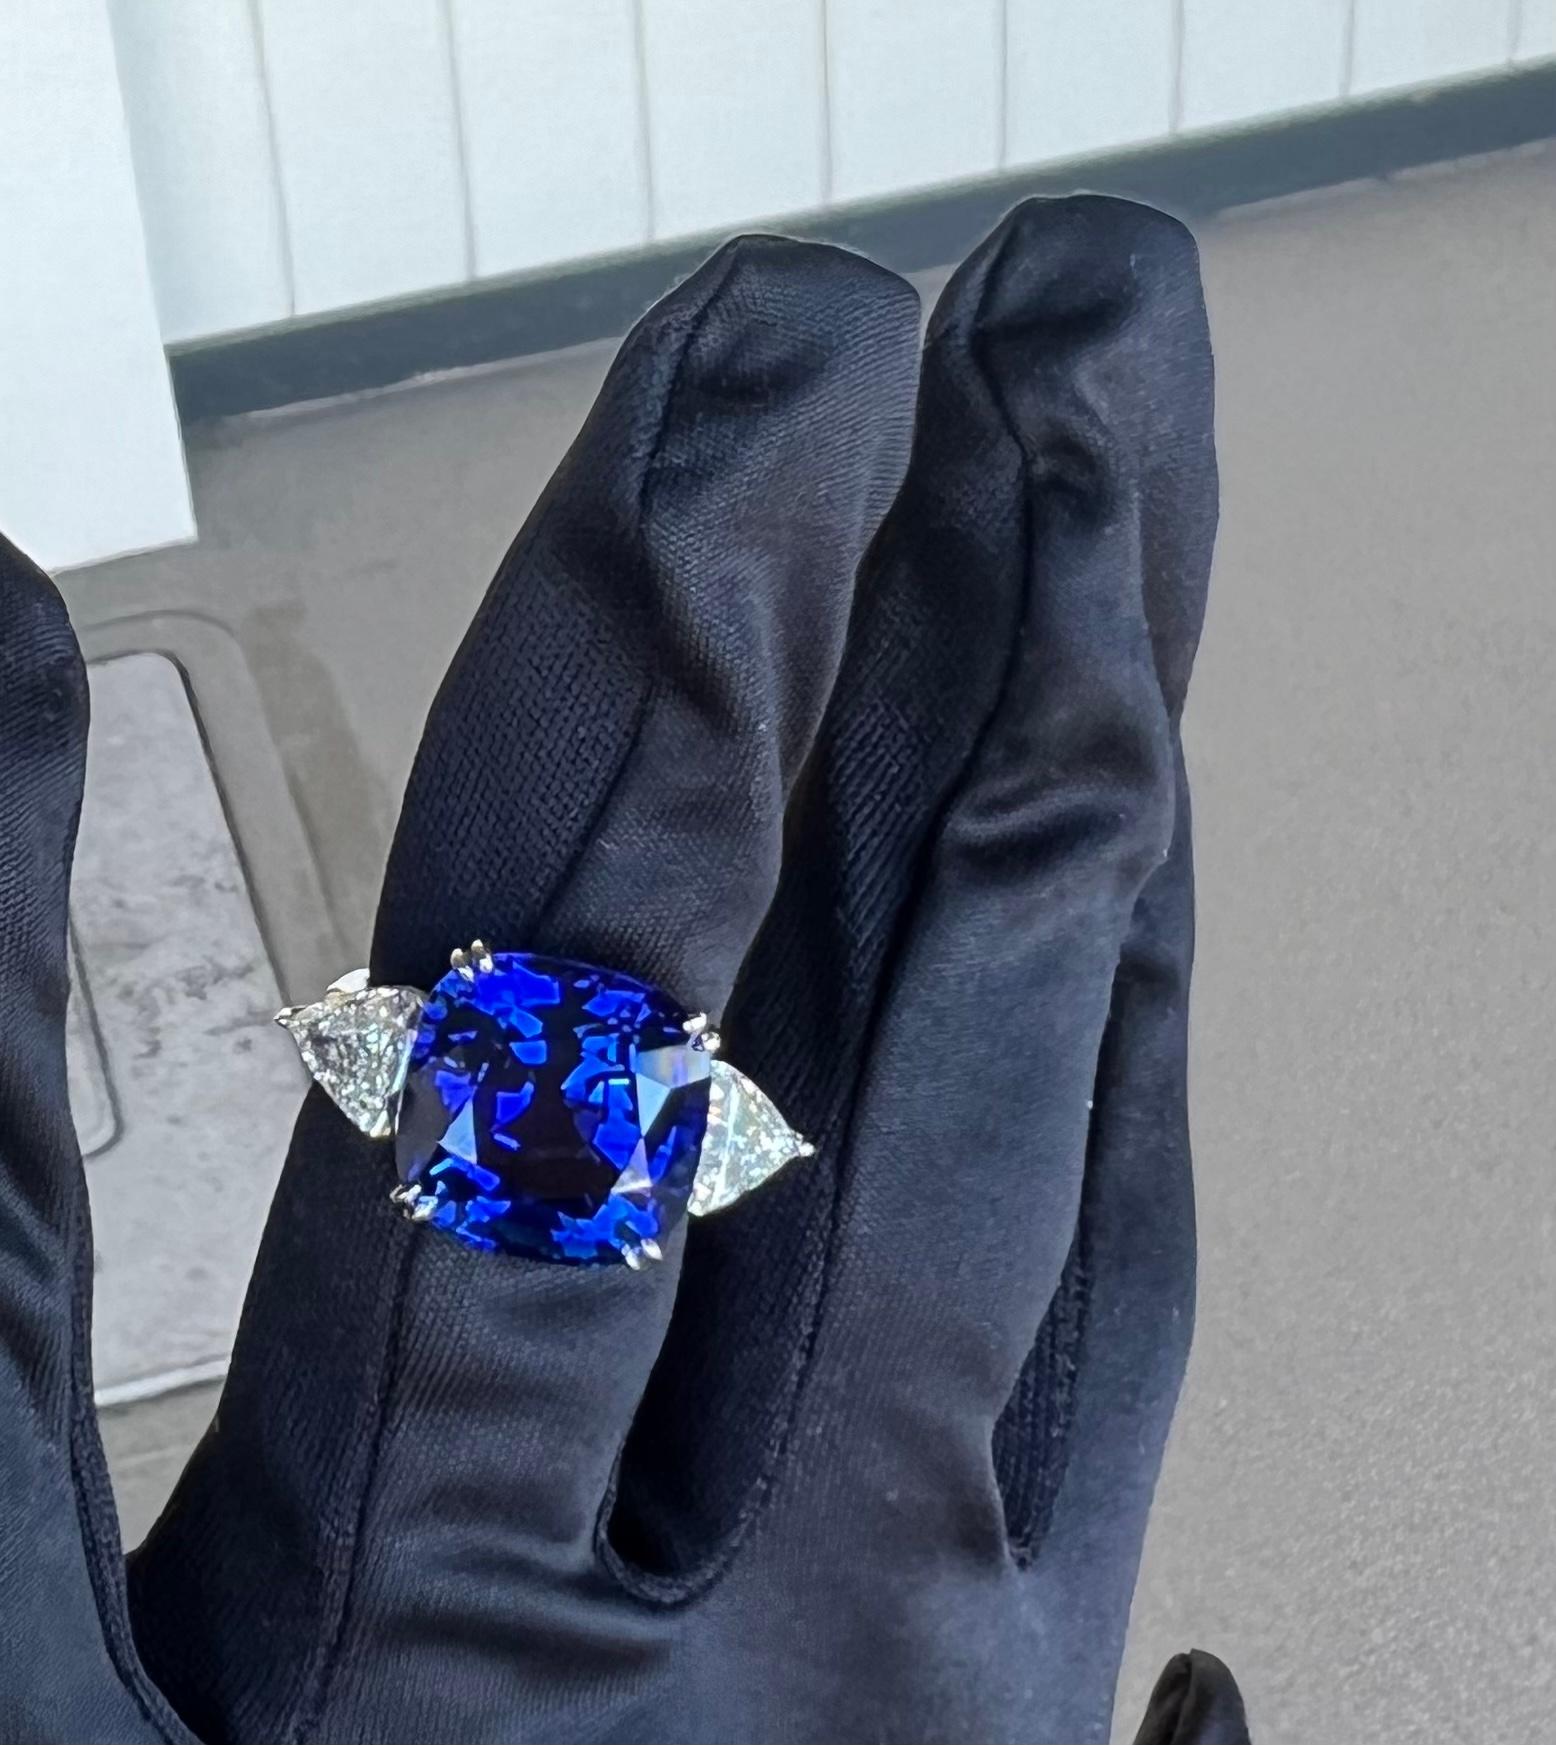 Stupendous and very significant, 21.12 carat estate GIA Certified huge brilliant cut natural corundum blue sapphire and diamond ring is set in platinum. This is the most incredible sapphire in person with the most intense royal blue color with